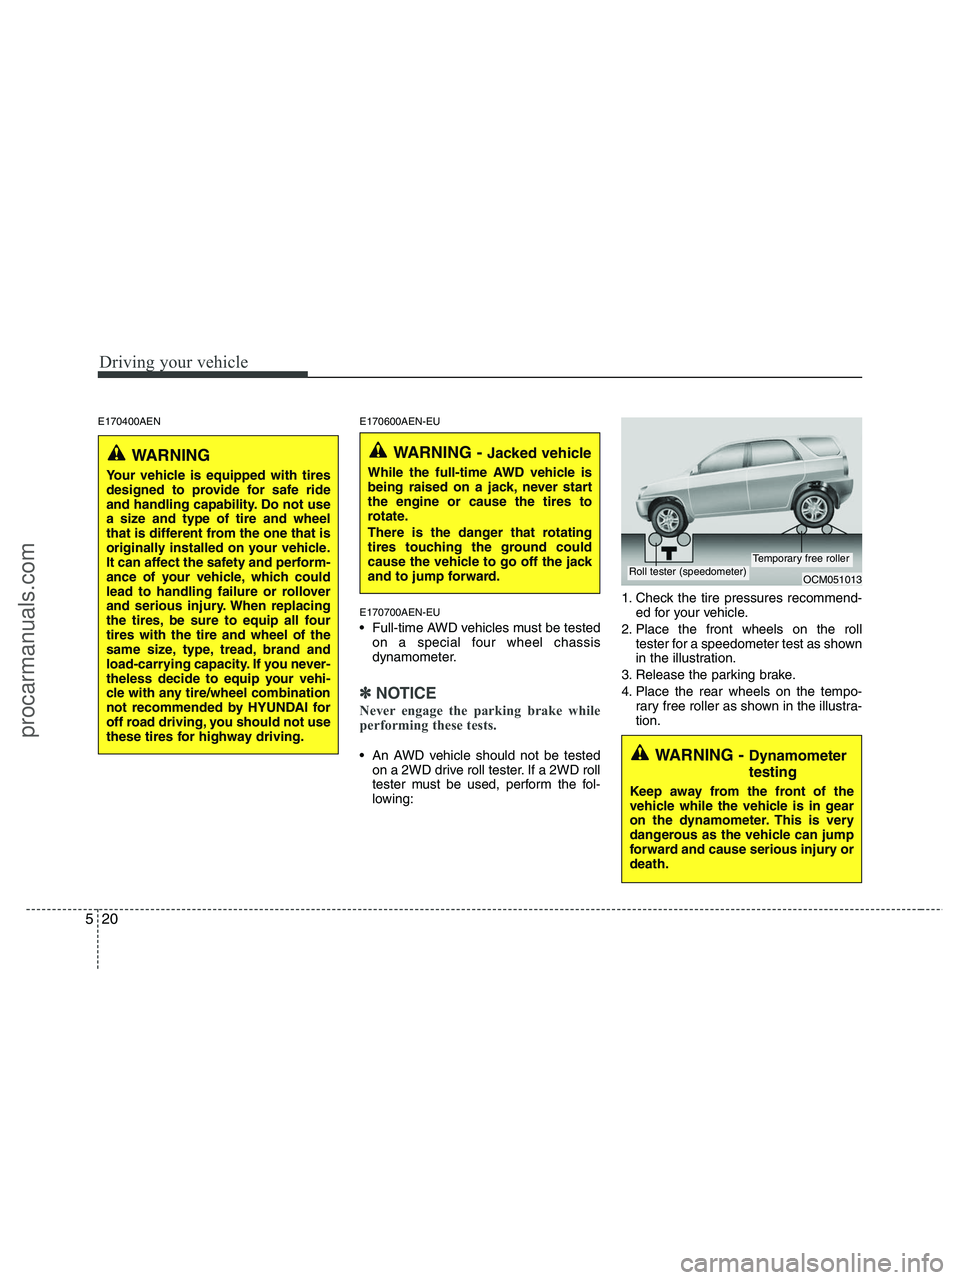 HYUNDAI VERACRUZ 2010  Owners Manual Driving your vehicle
20 5
E170400AEN E170600AEN-EU
E170700AEN-EU
 Full-time AWD vehicles must be tested
on a special four wheel chassis
dynamometer.
✽ ✽
NOTICE
Never engage the parking brake while